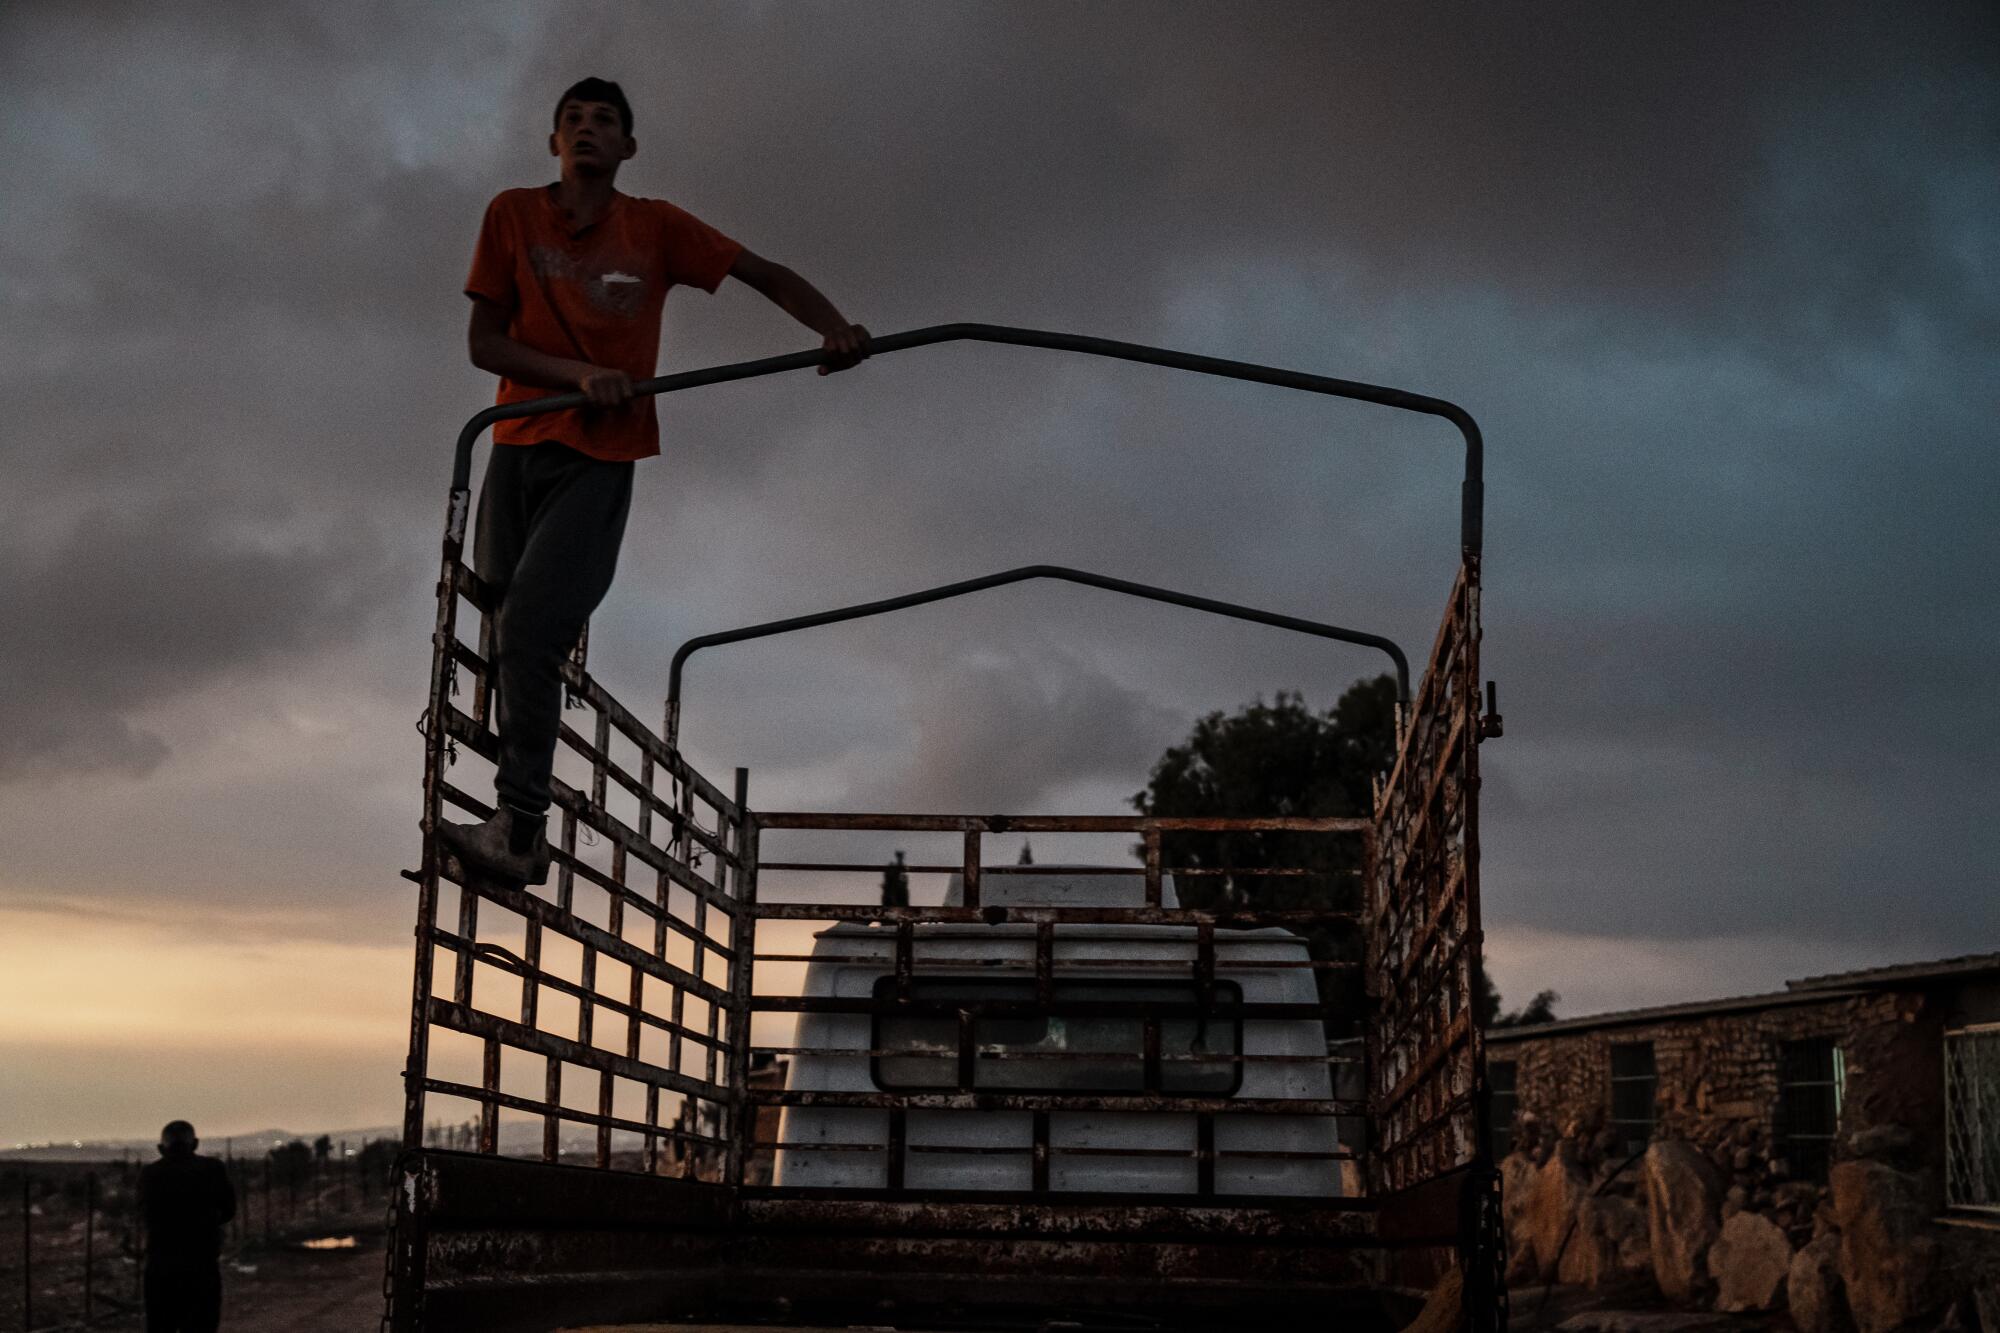 A Palestinian boy climbs to the top of the truck for a better view after neighbors announced Israeli military arriving.